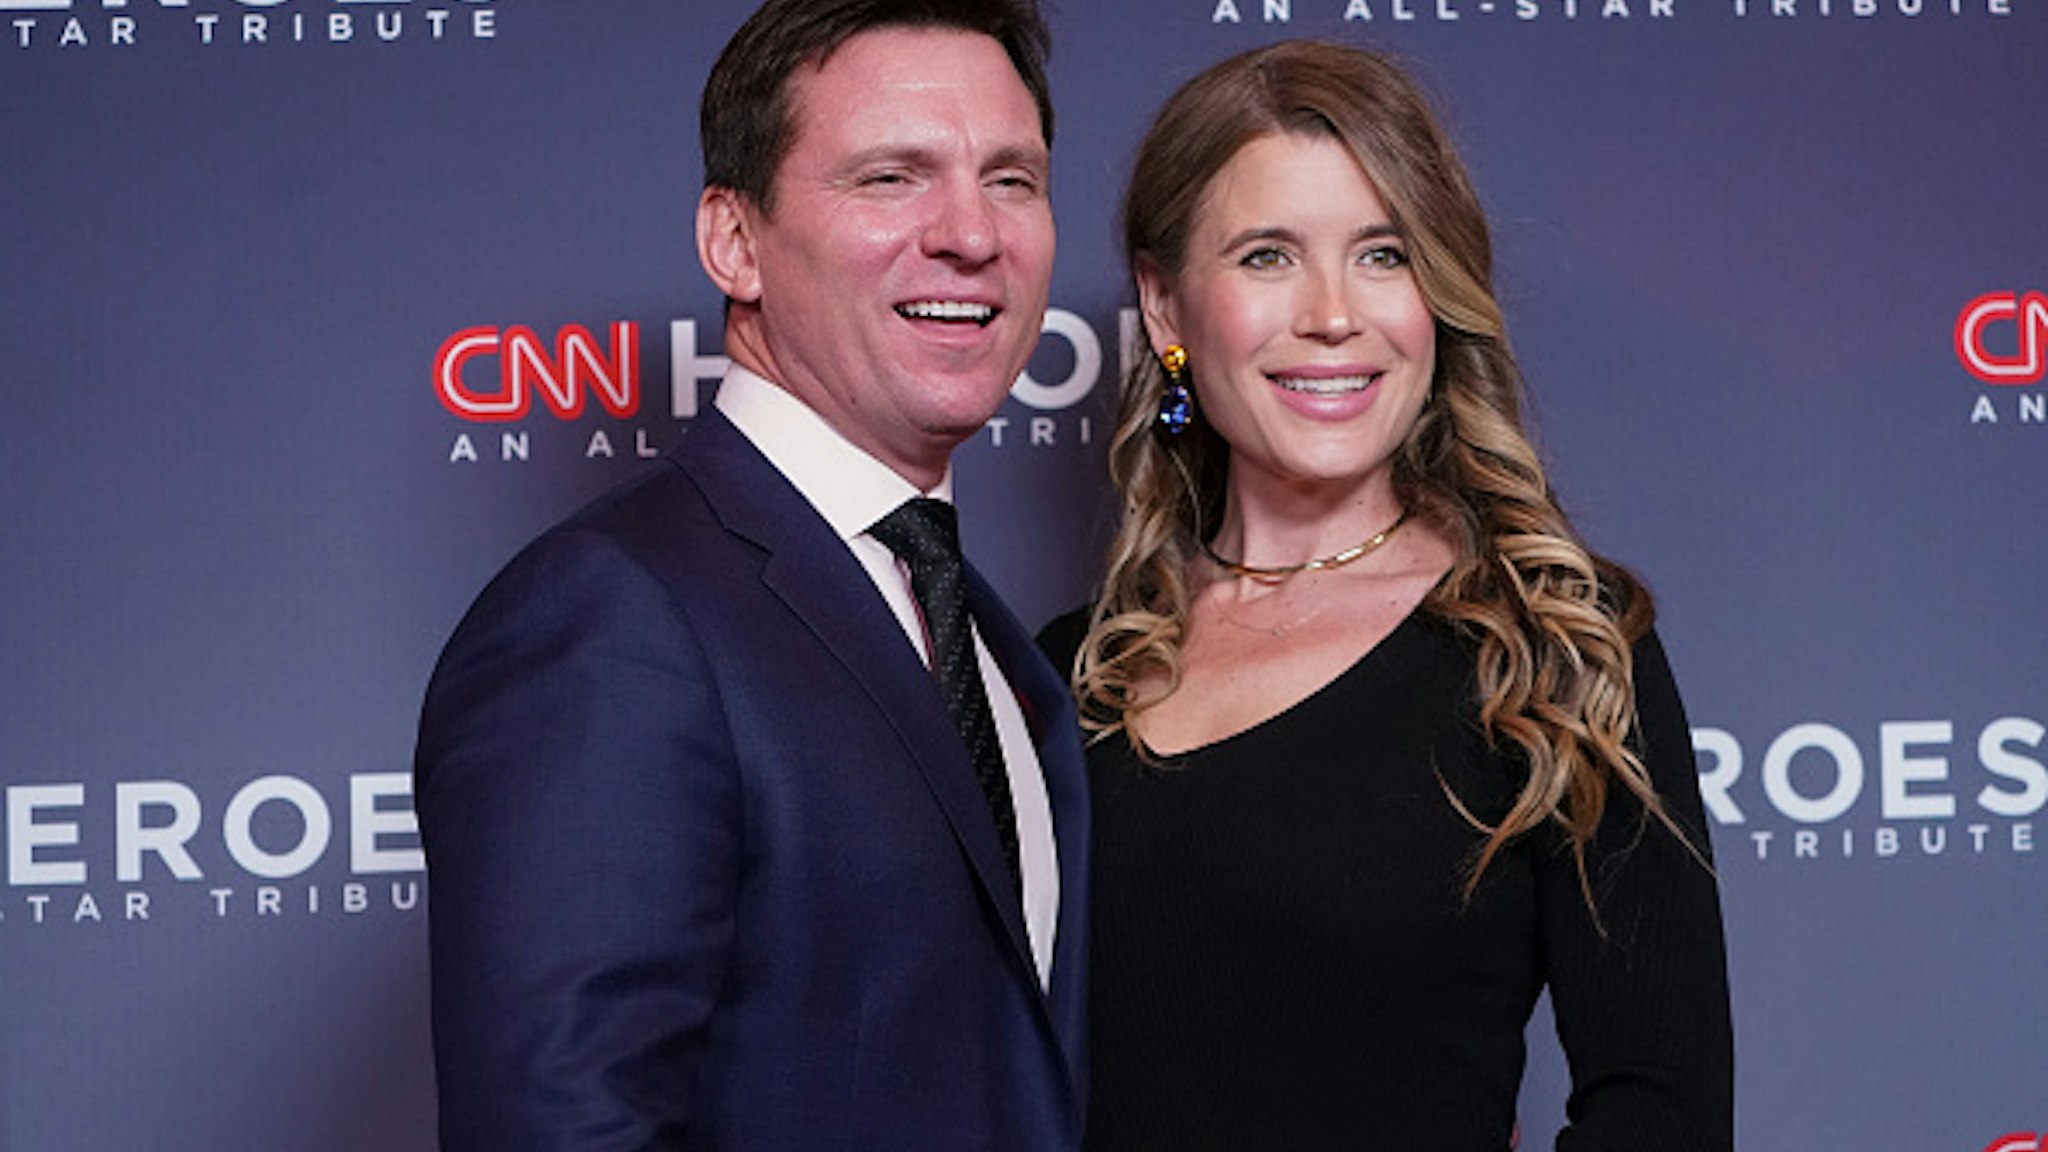 NEW YORK, NEW YORK - DECEMBER 08:: Bill Weir (L) attends the 13th Annual CNN Heroes at the American Museum of Natural History on December 08, 2019 in New York City.